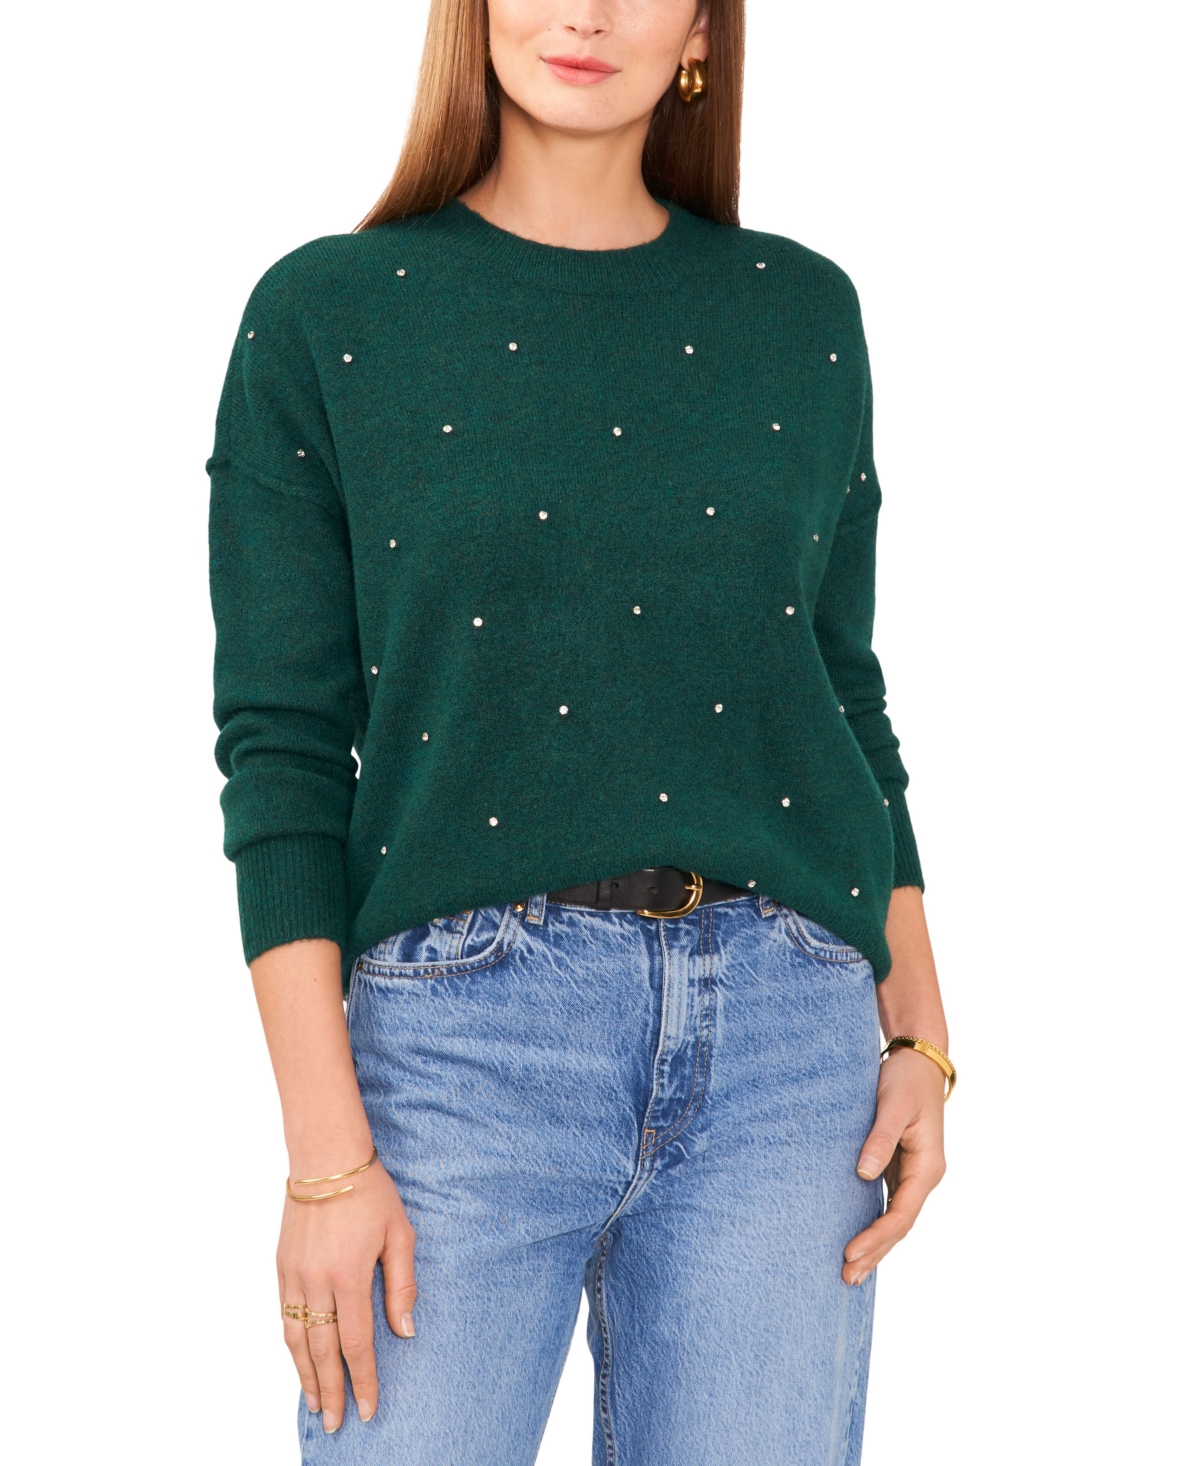 Vince Camuto Women's Rhinestone Studded Drop Shoulder Crewneck Sweater In Wise